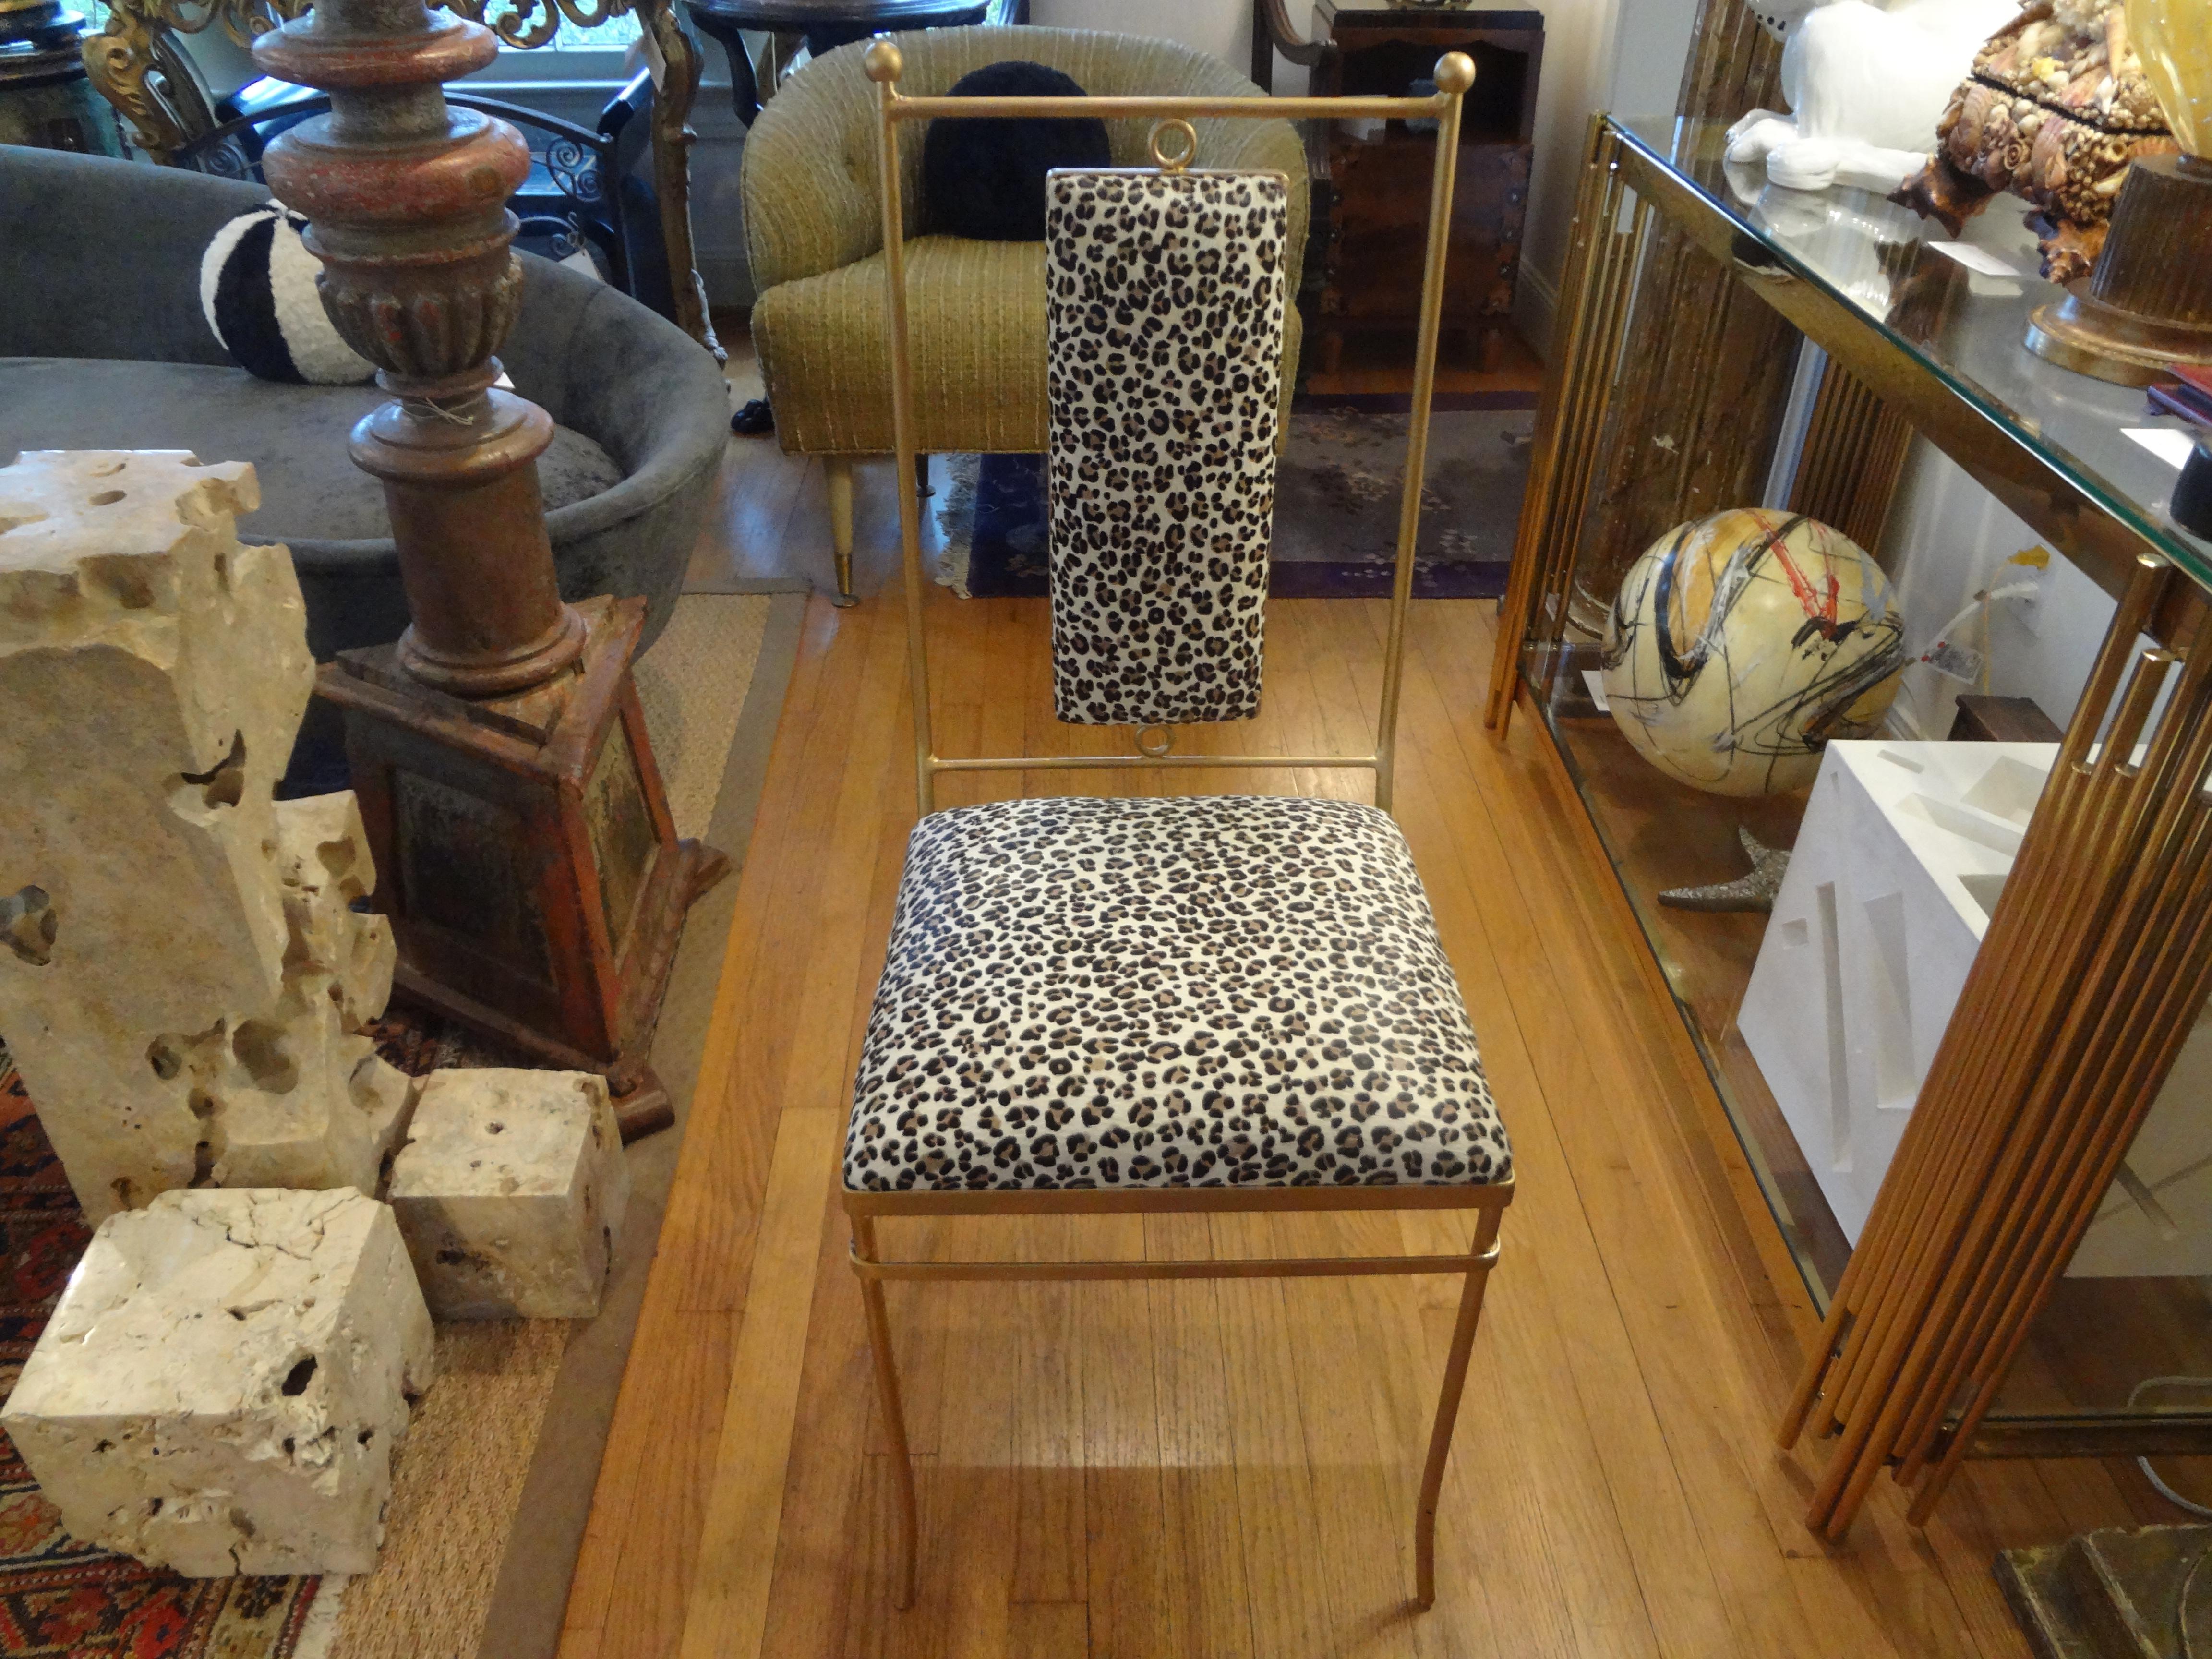 Great Mid-Century Modern Italian gilt iron side chair professionally upholstered in imported Italian leopard printed hide.
This Hollywood Regency Italian Chiavari style chair is the perfect side chair, vanity chair, powder room chair or desk chair.